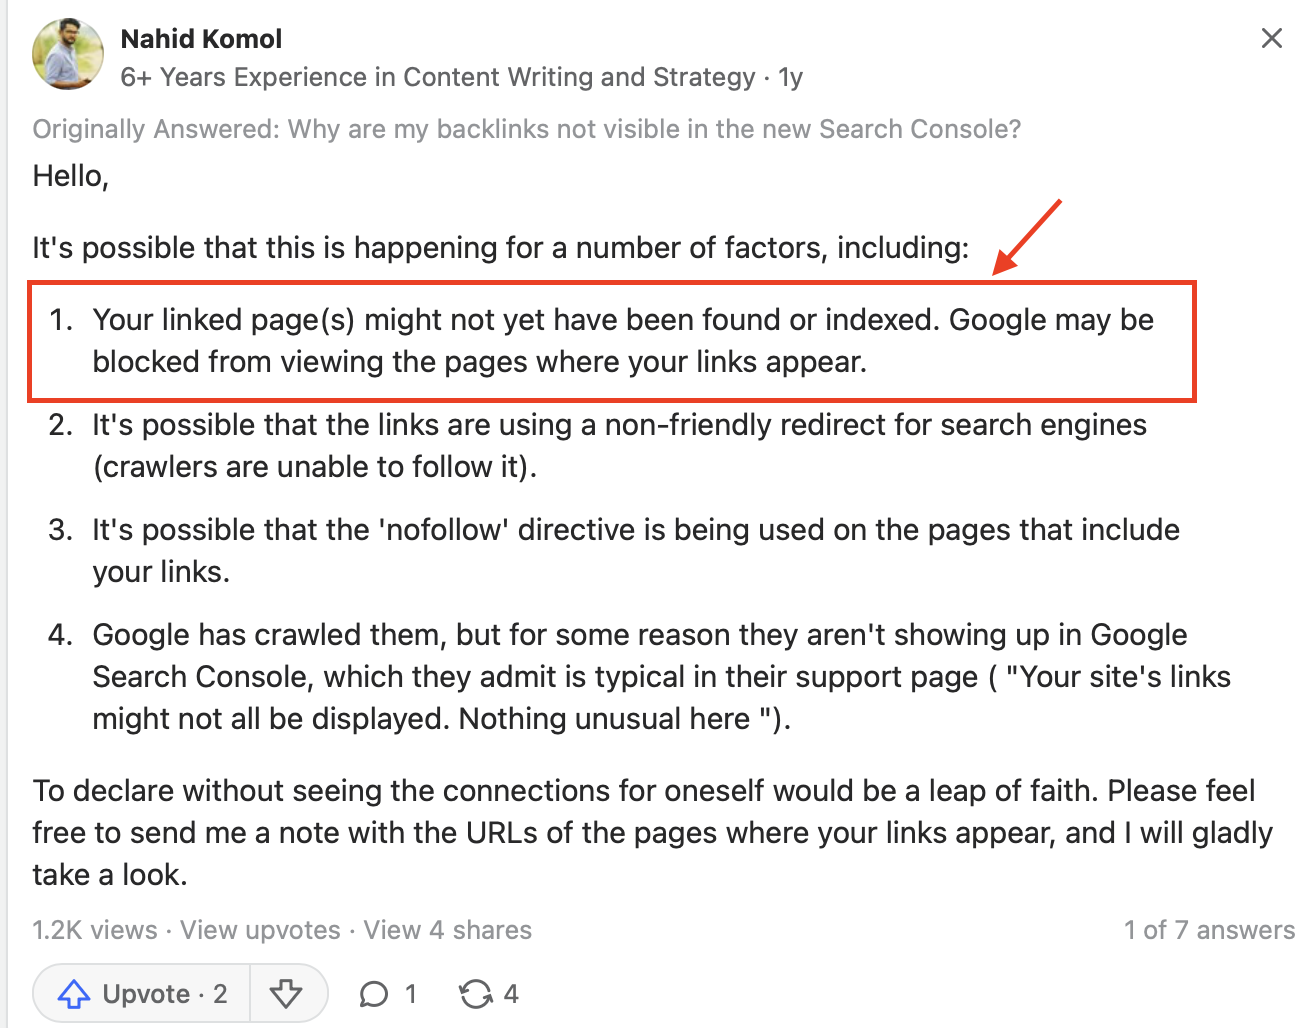 Quora discussion regarding possible reasons why GSC does not register backlink